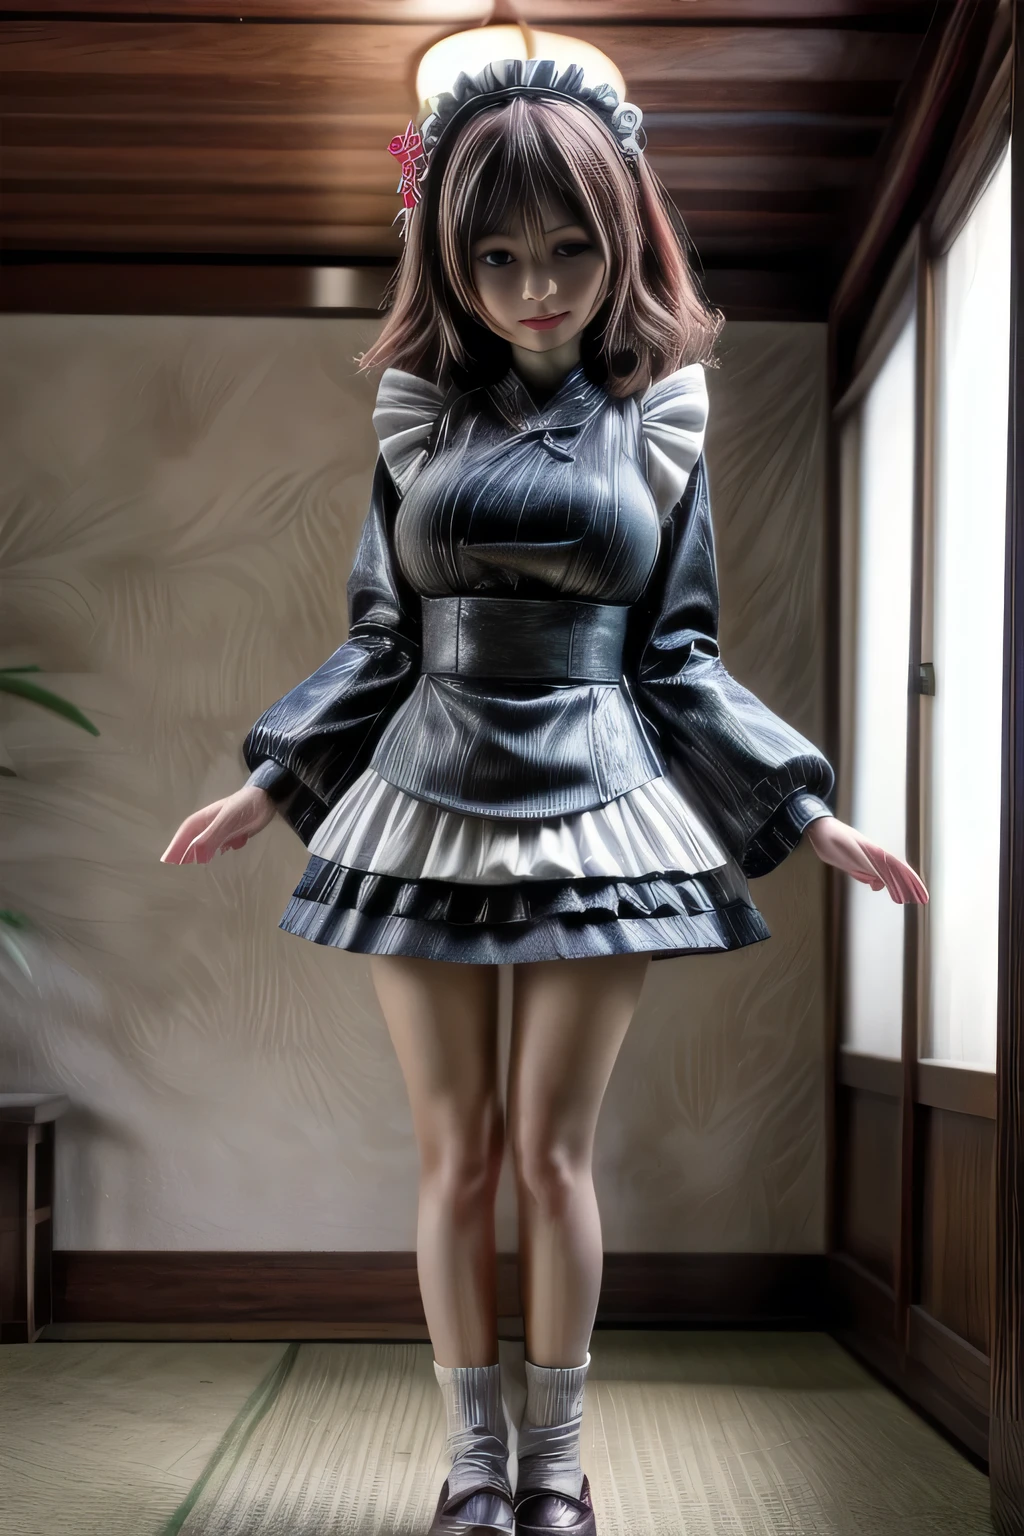 japanese milf wearing Maid Outfit, standing, full body shot